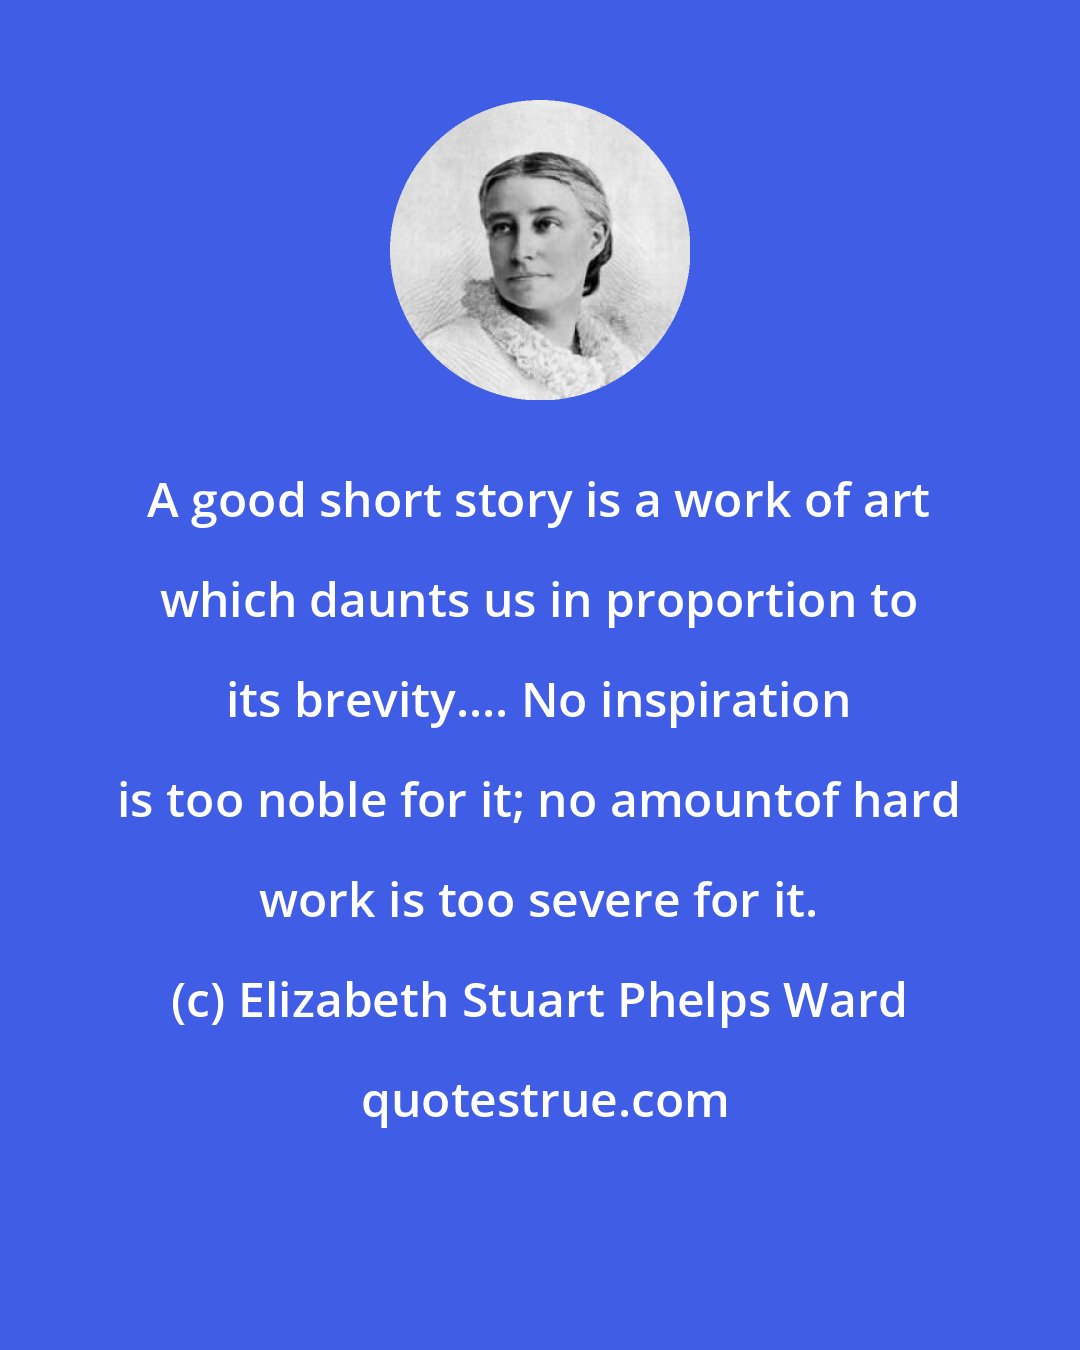 Elizabeth Stuart Phelps Ward: A good short story is a work of art which daunts us in proportion to its brevity.... No inspiration is too noble for it; no amountof hard work is too severe for it.